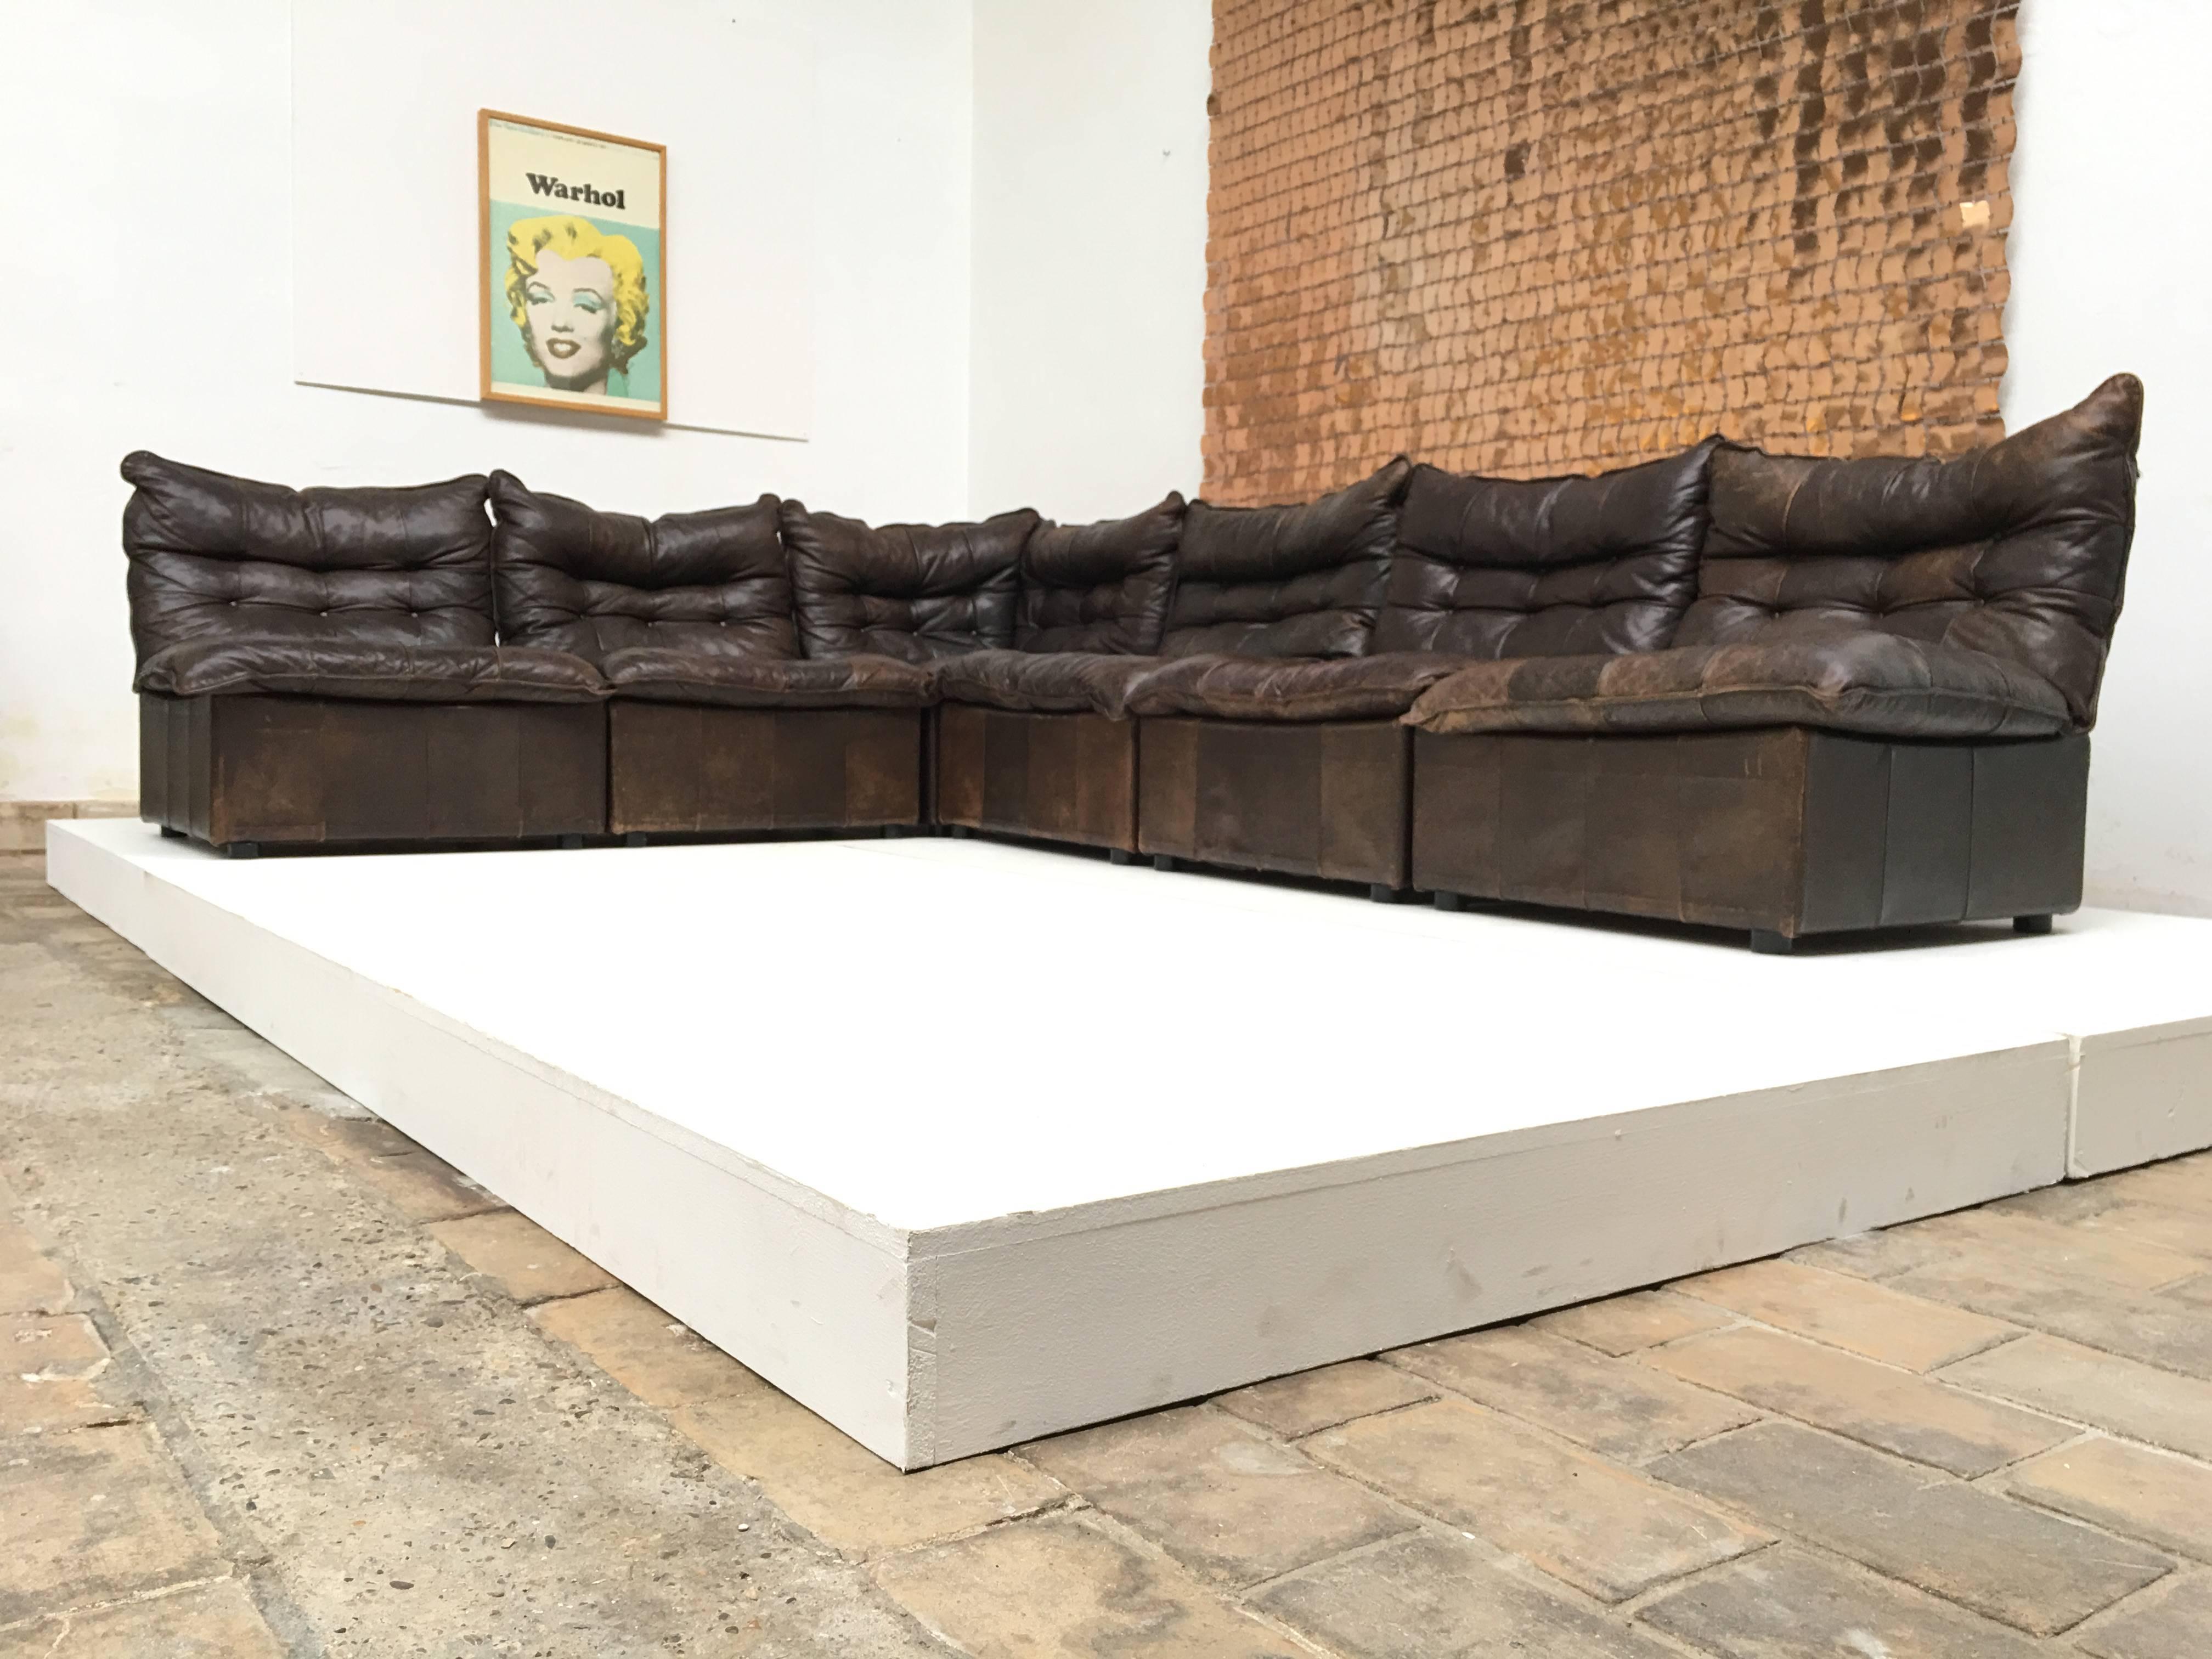 Gypset style distressed chocolate brown leather sectional sofa with wood and canvas details in the backrest.

The quality of this sectional sofa is like a Swiss Desede but this one is most likely to be produced by Leolux in the 1970s.
Leolux is